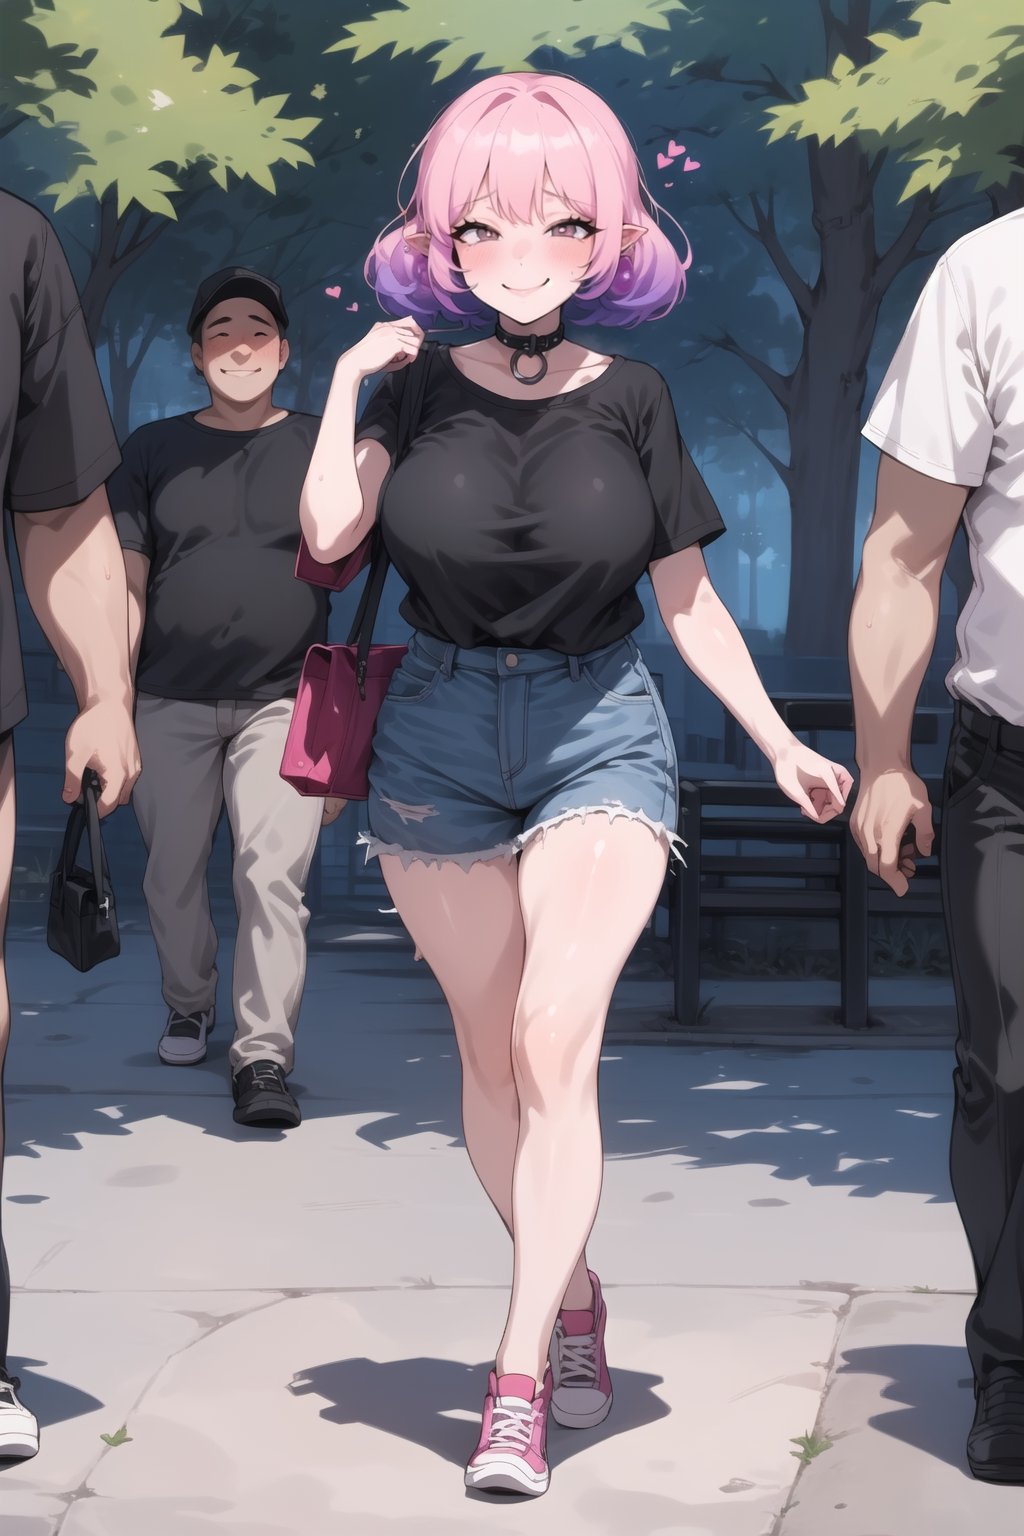 (full_body:1.5) ,(((focus_1girl,))),smile:0.1,blush:0.1,shushing,cute,((lucid:1)),pink_hair,beautiful_face,160cm,(huge_breasts,huge_tits, fat_thighs:0.6),Casual_Wear,in park,dating_with_(white_hair_man),walking